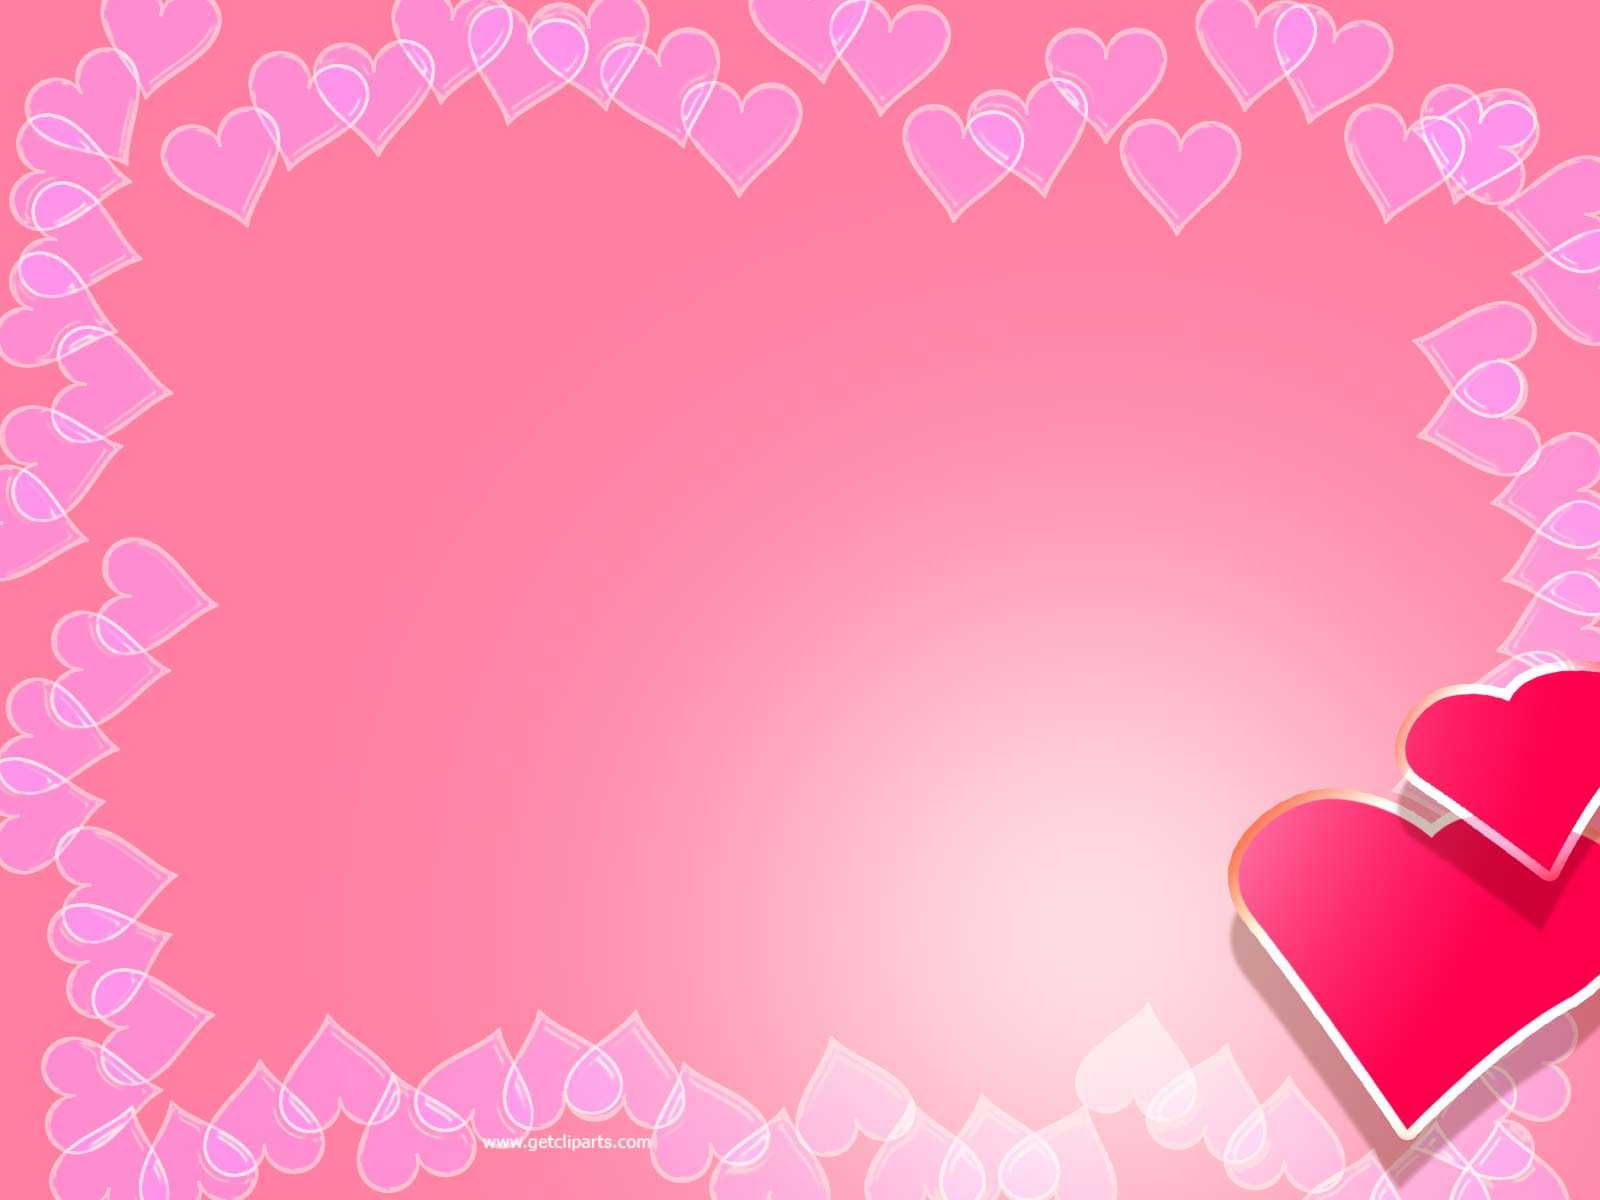 Getcliparts : Visual Communication Designs » Blog Archive Within Valentine Powerpoint Templates Free